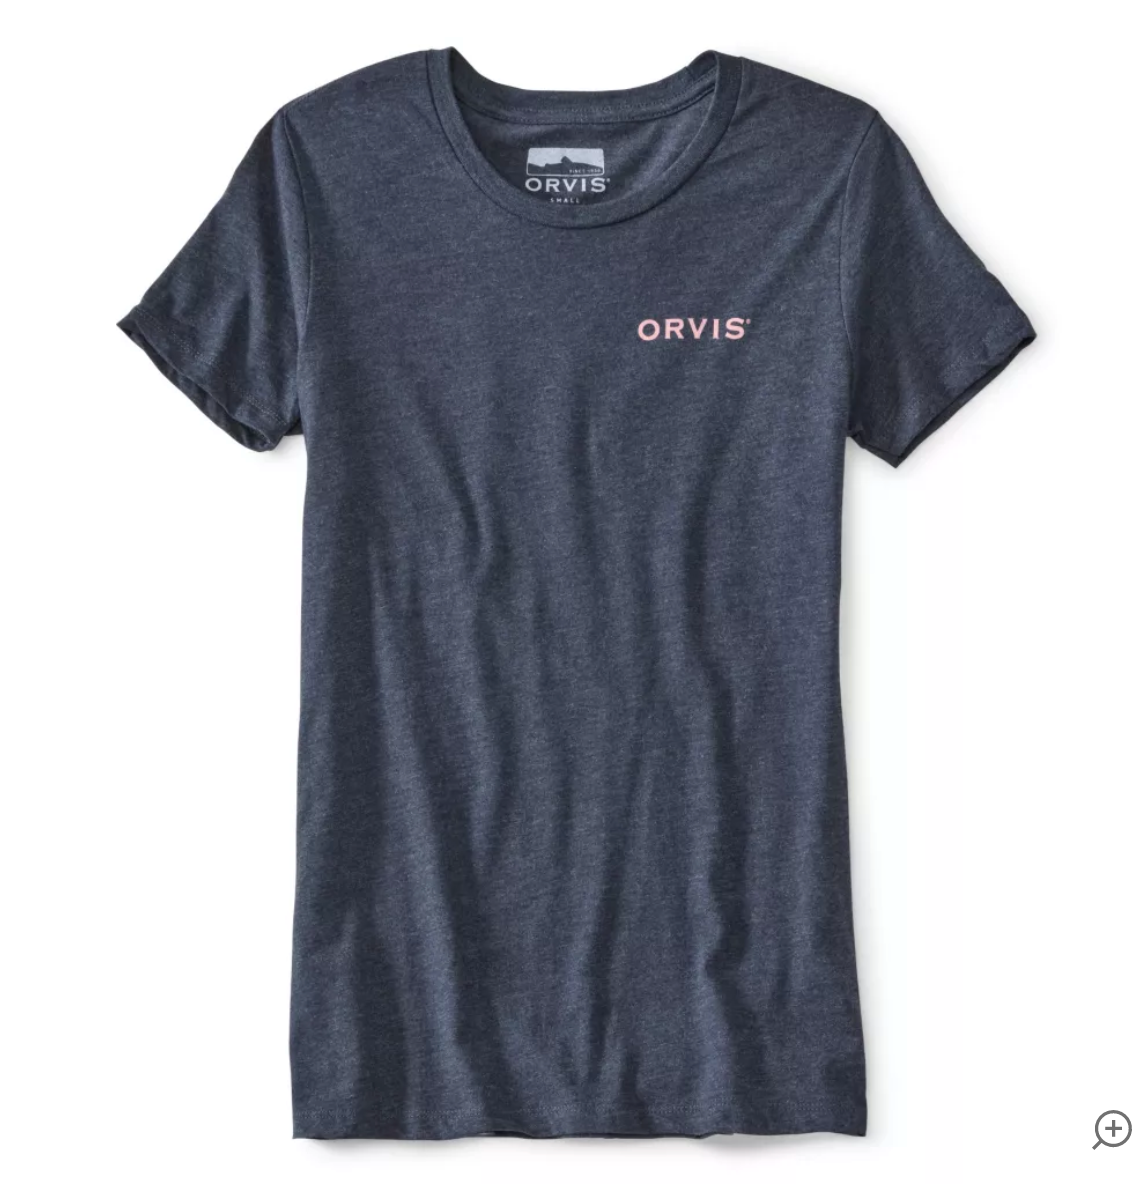 Orvis Women’s Protect What We Love Tee